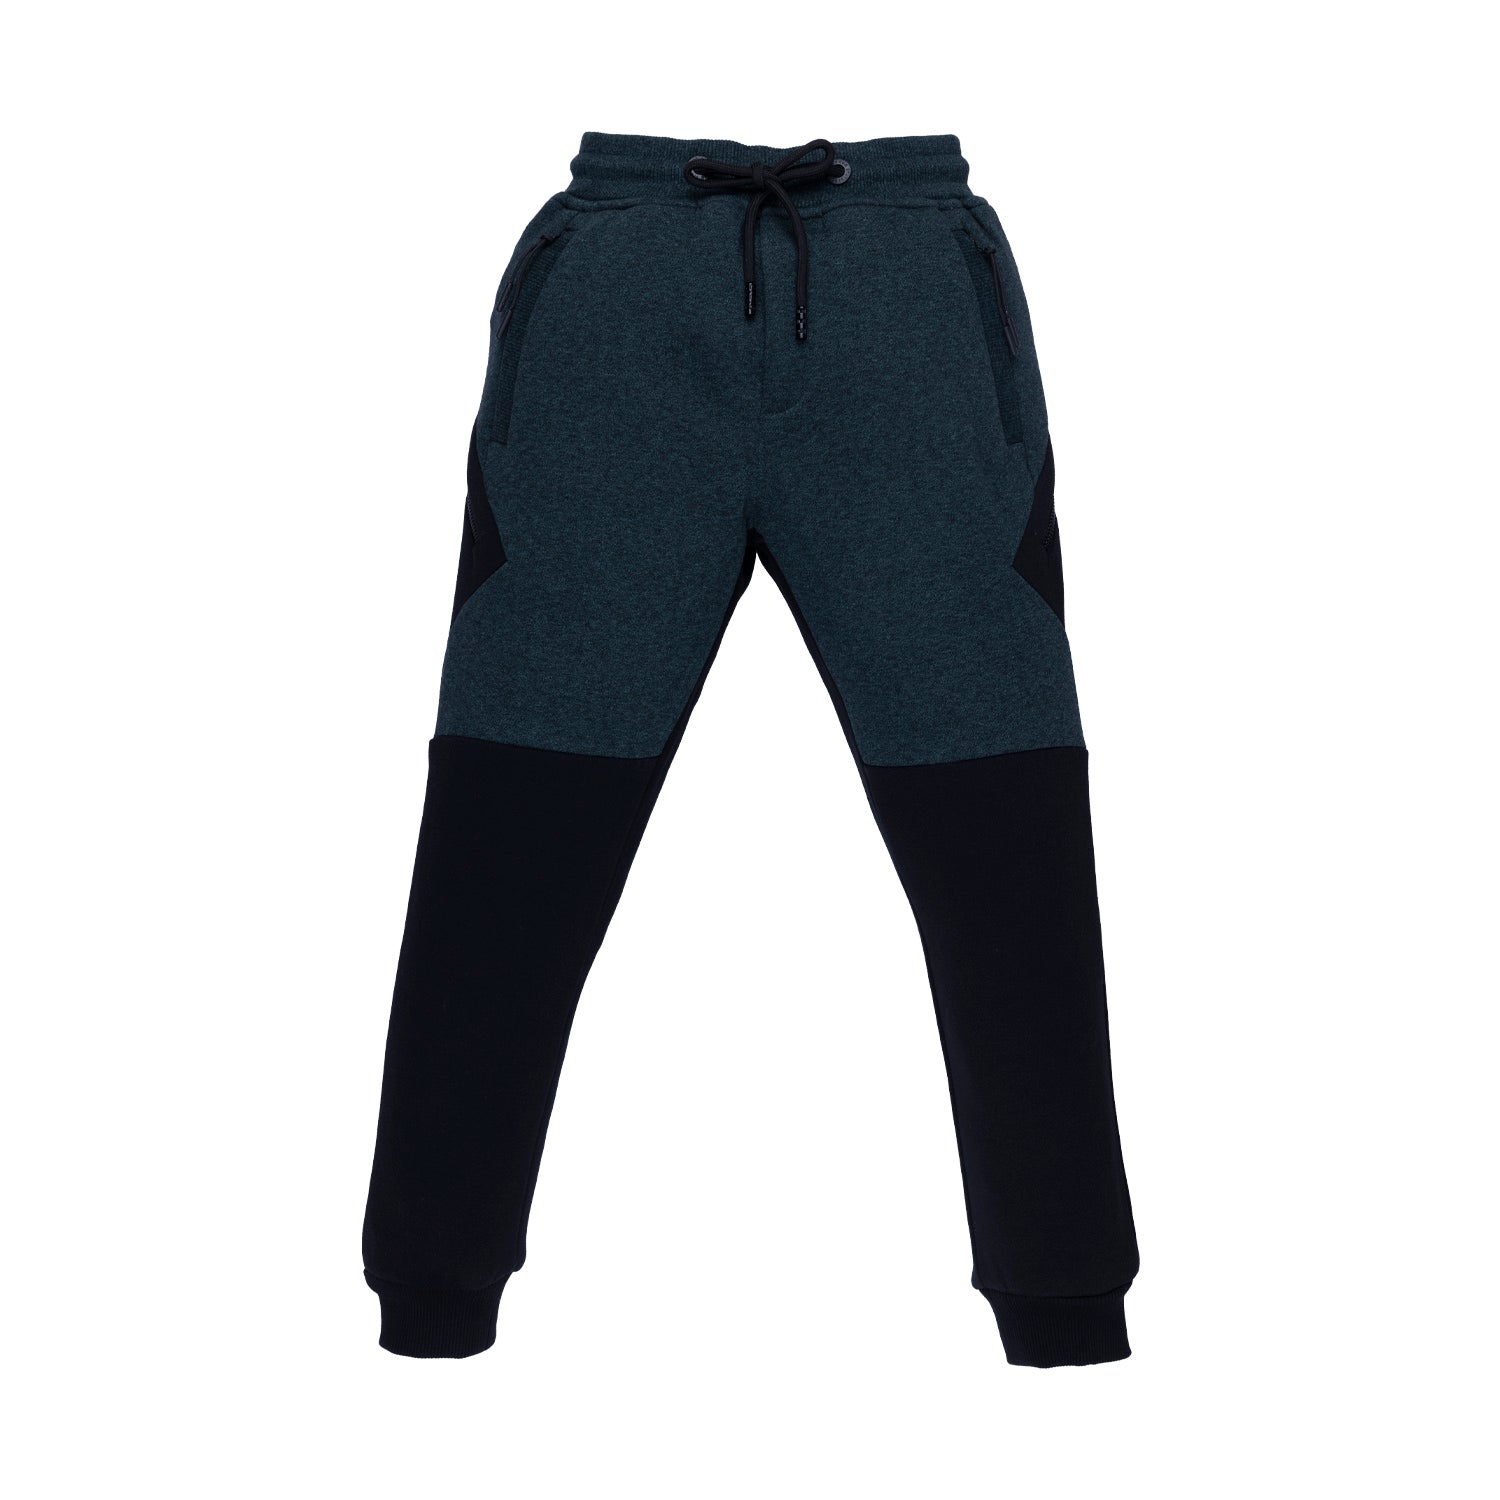 joggers for boys